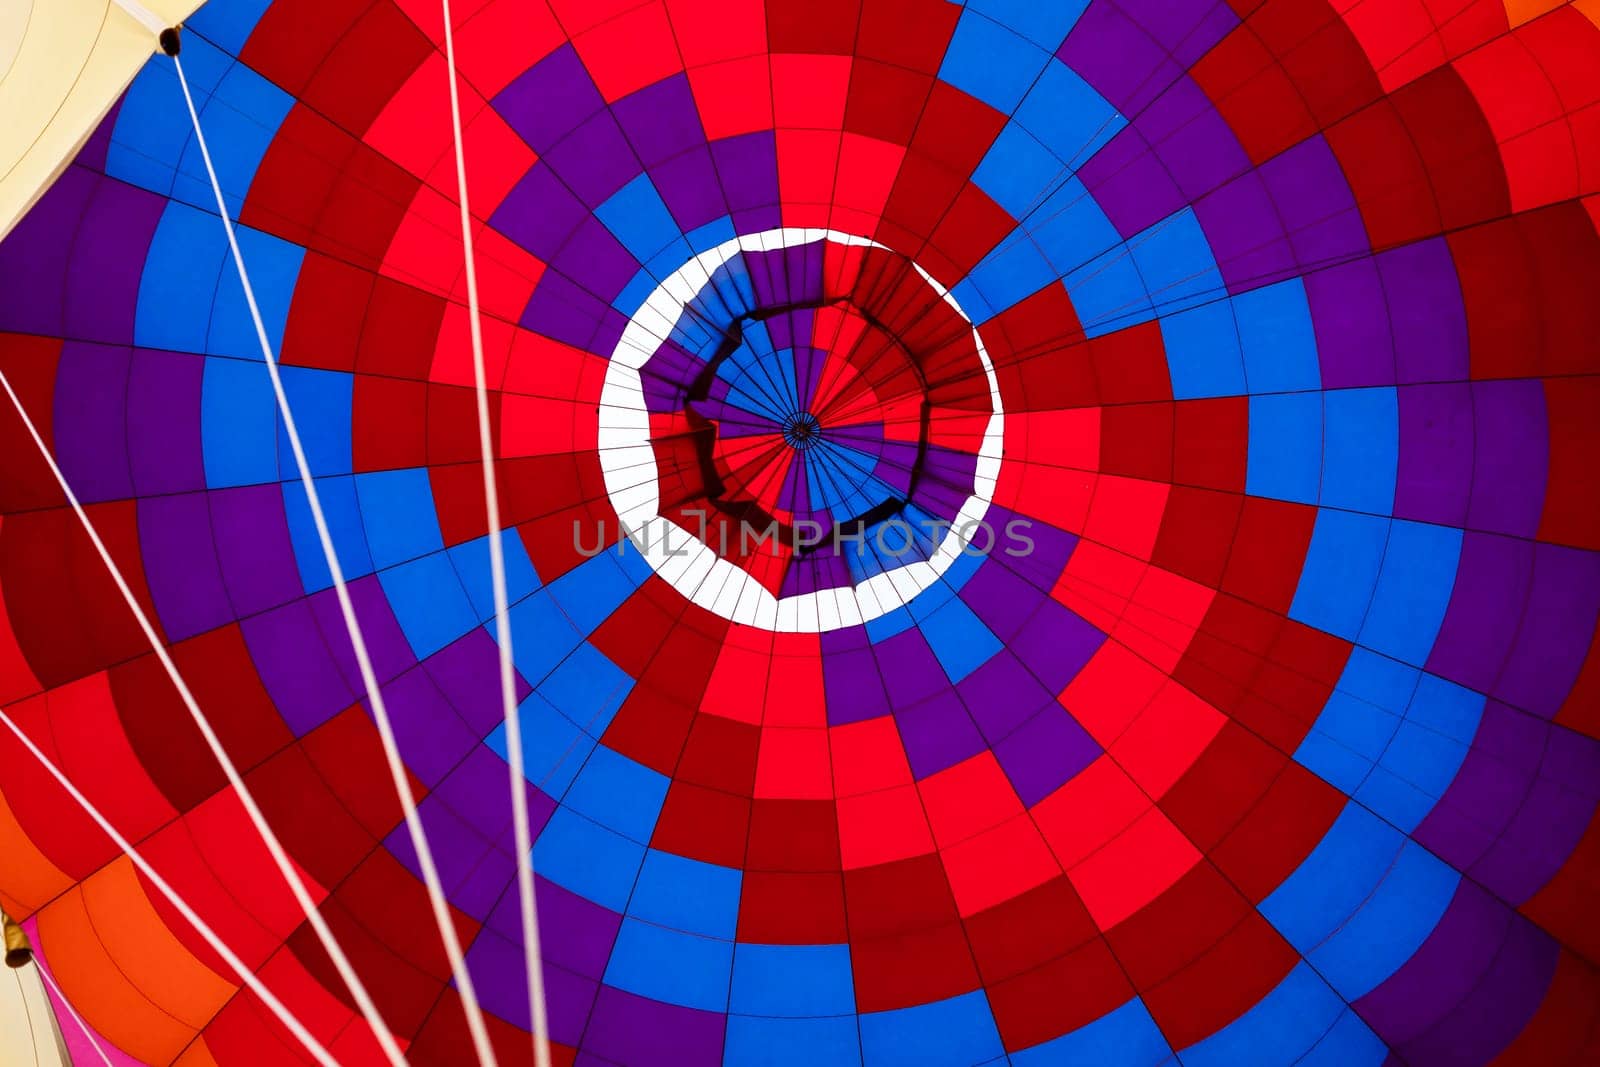 Abstract Background, View Inside Bright Colorful Hot Air Balloon Dome. Multi Colored, Horizontal Plane. Hot Air Expedition, Ride. Joyful, Spectacular Entertainment by netatsi